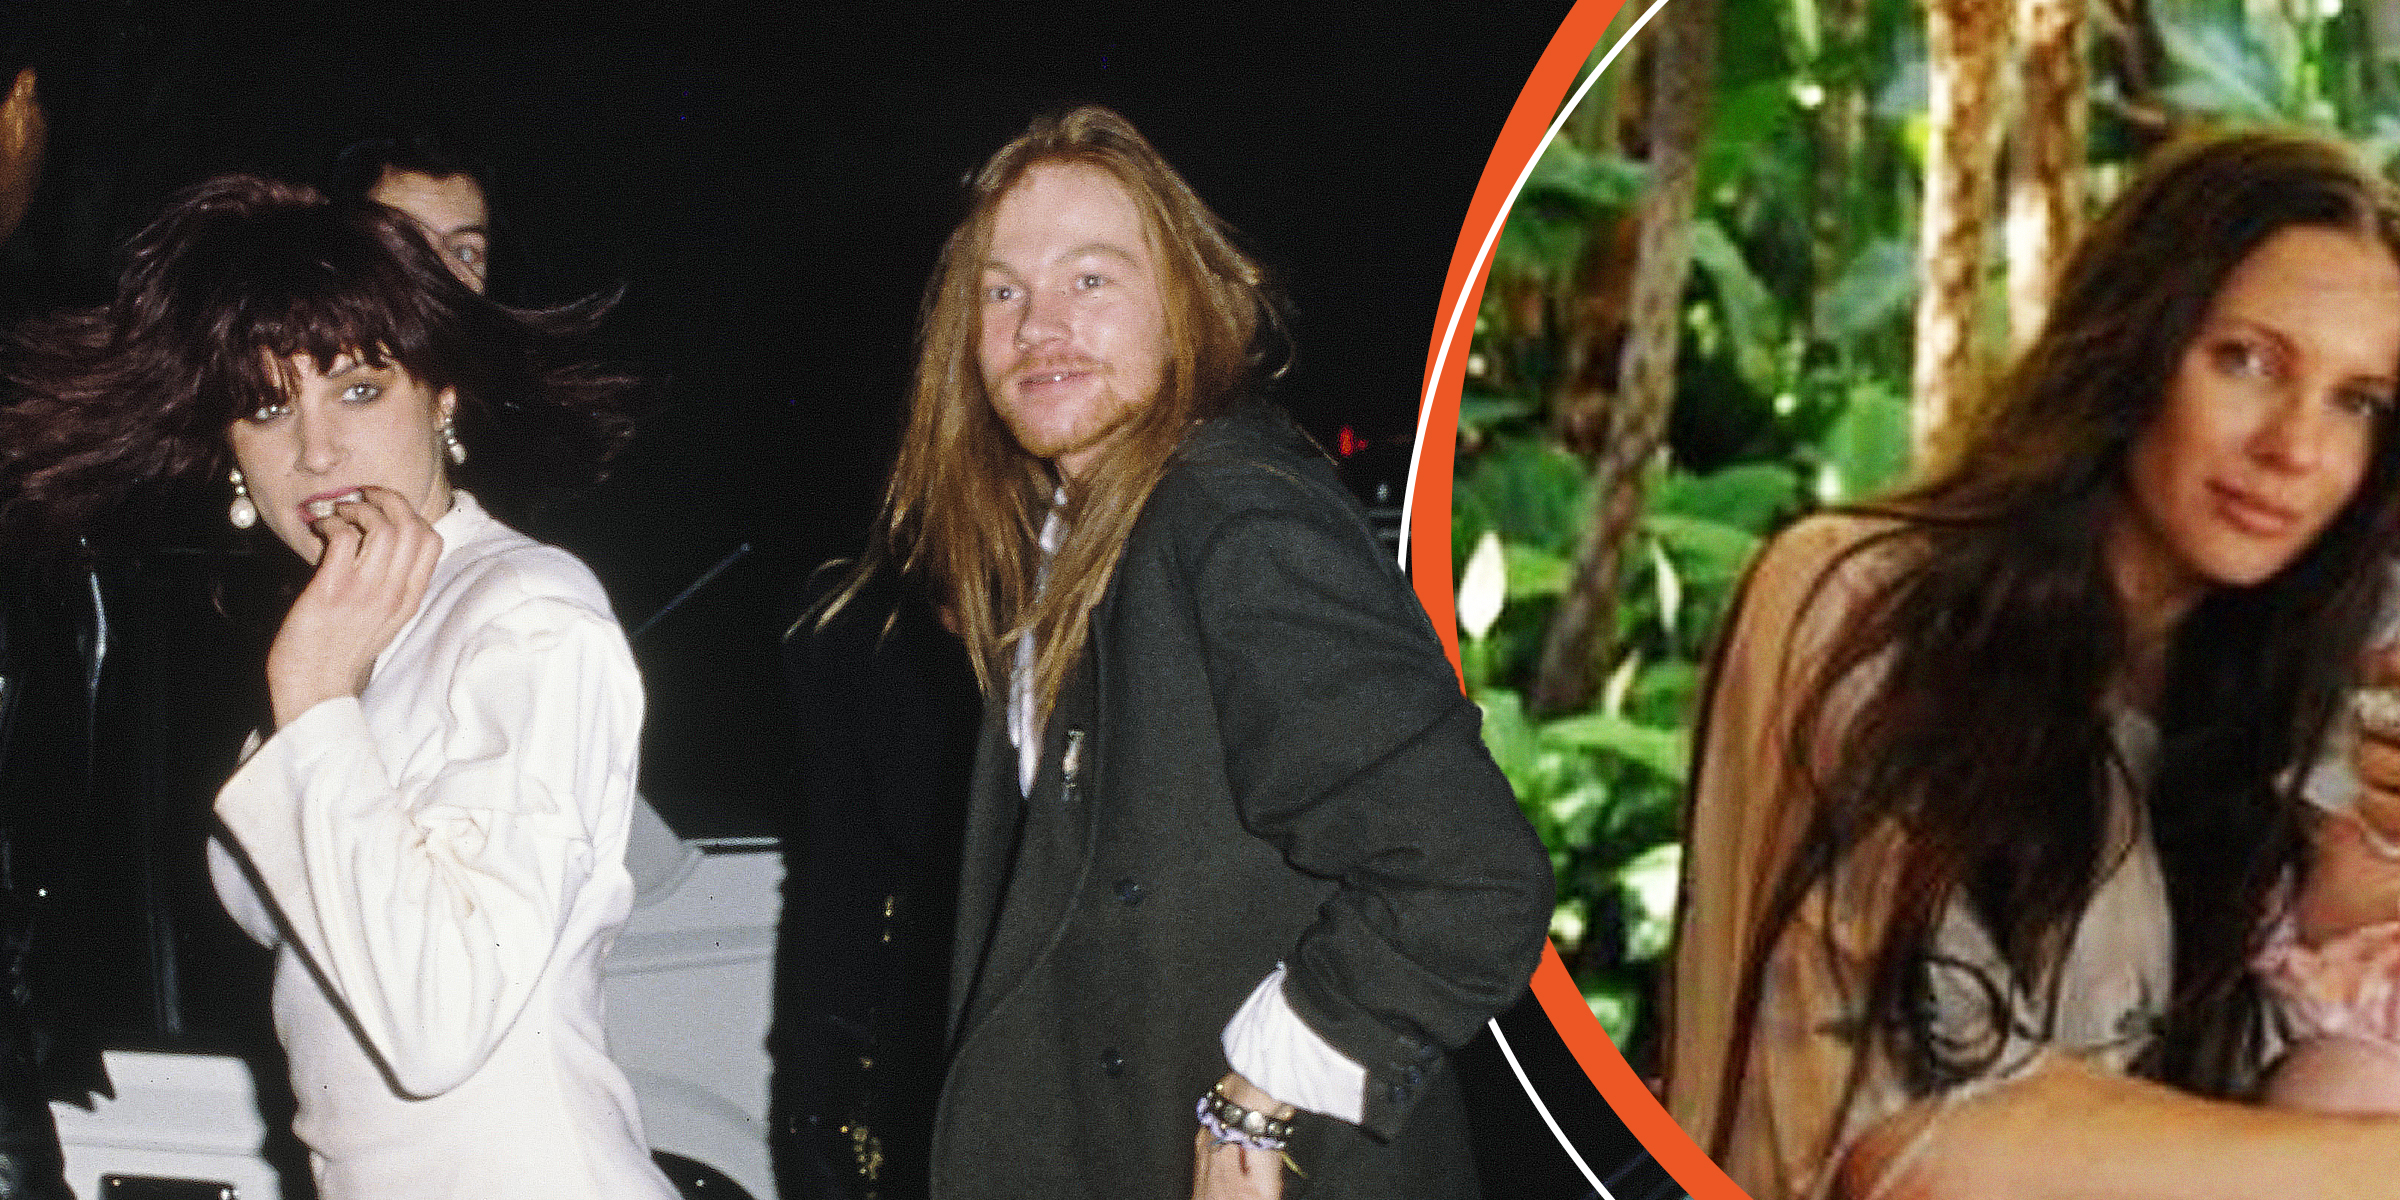 Erin Everly and Axl Rose | Erin Everly | Source: Getty Images